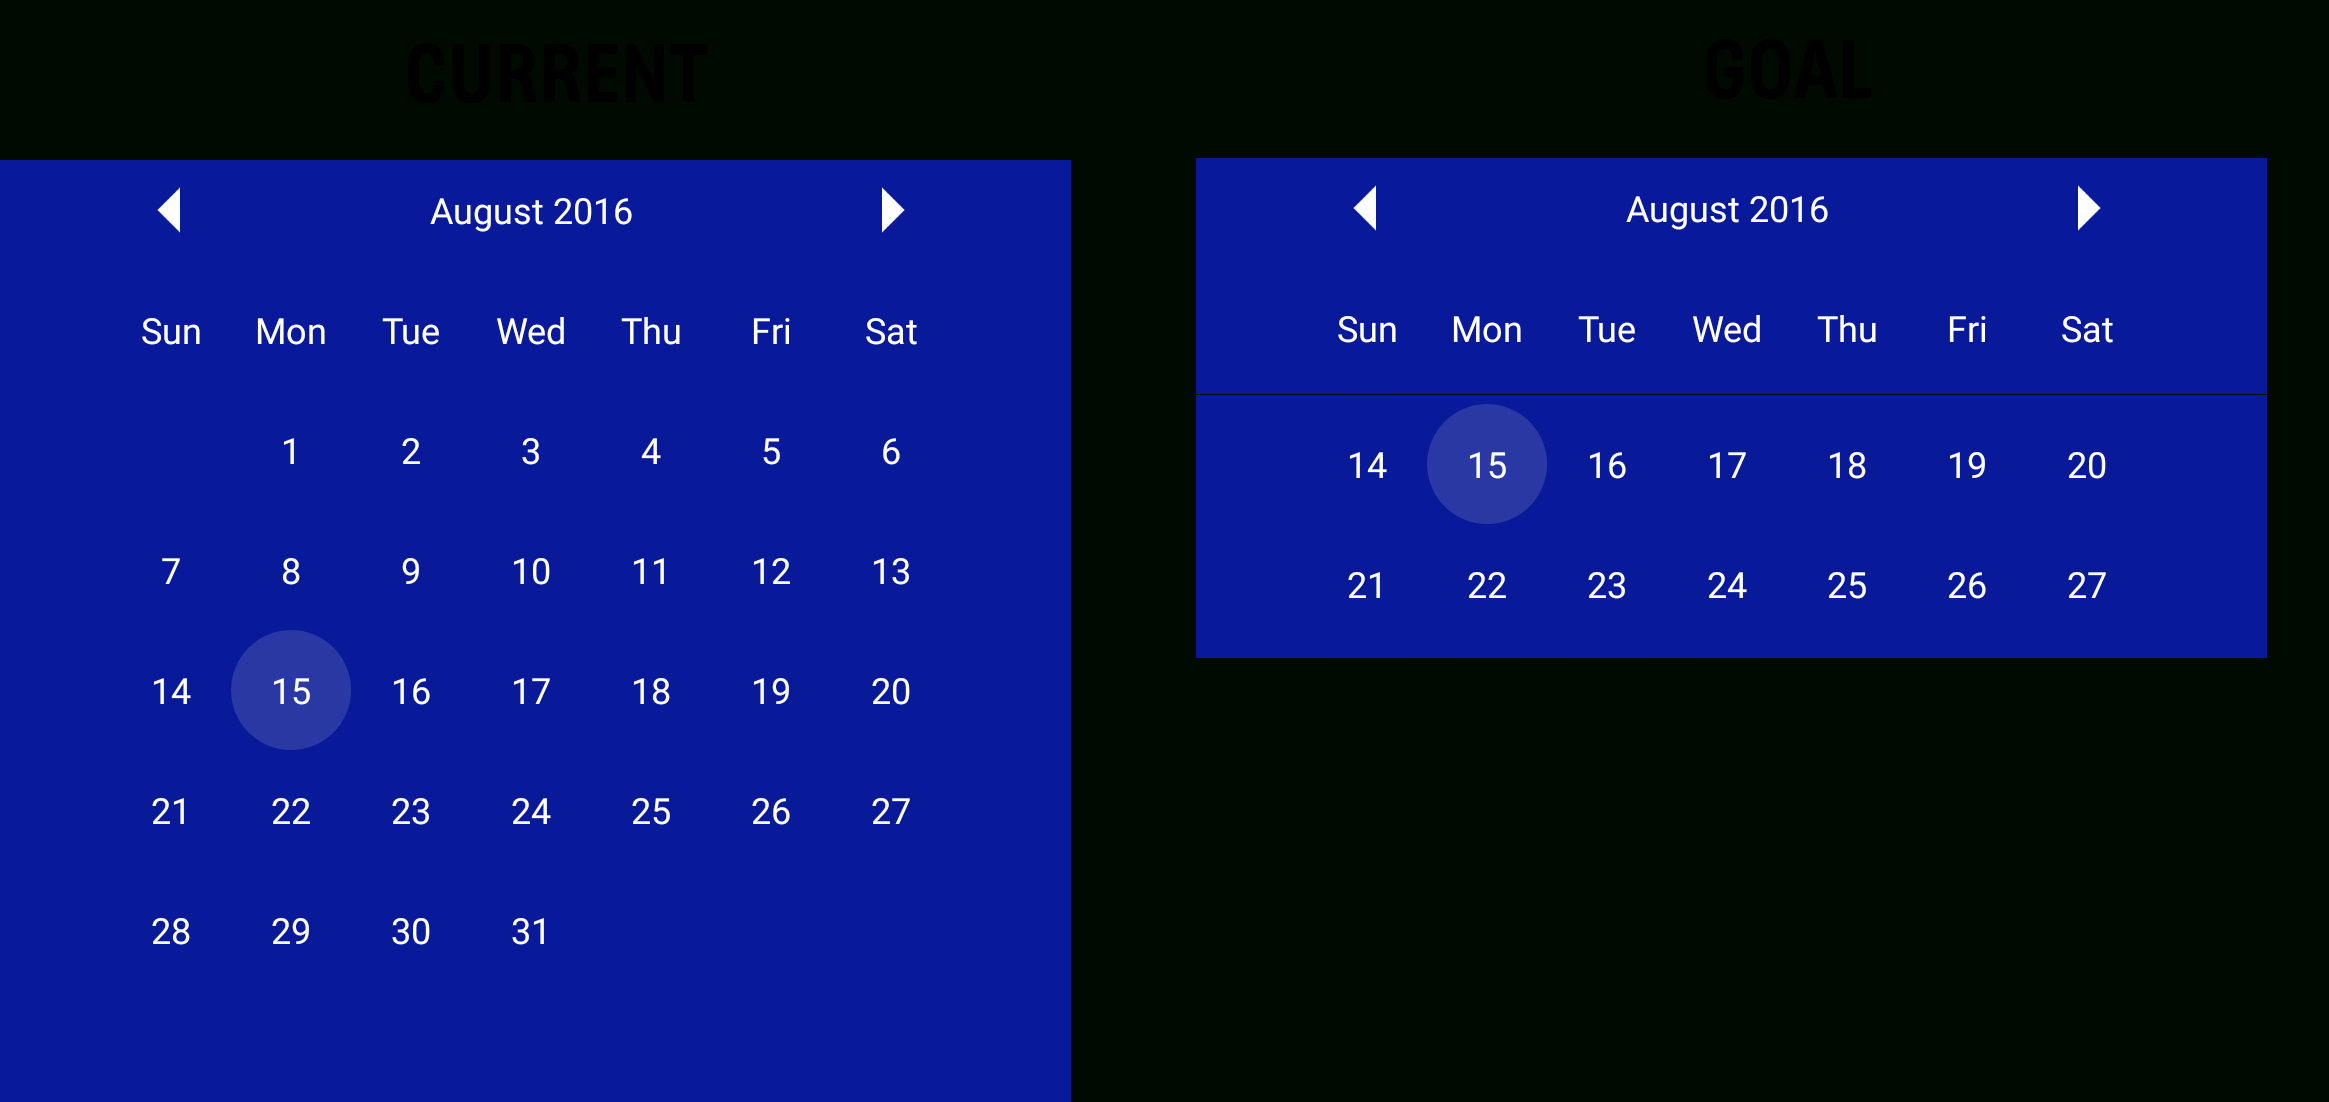 How To Display Only 2 Week In Calendarview In Android